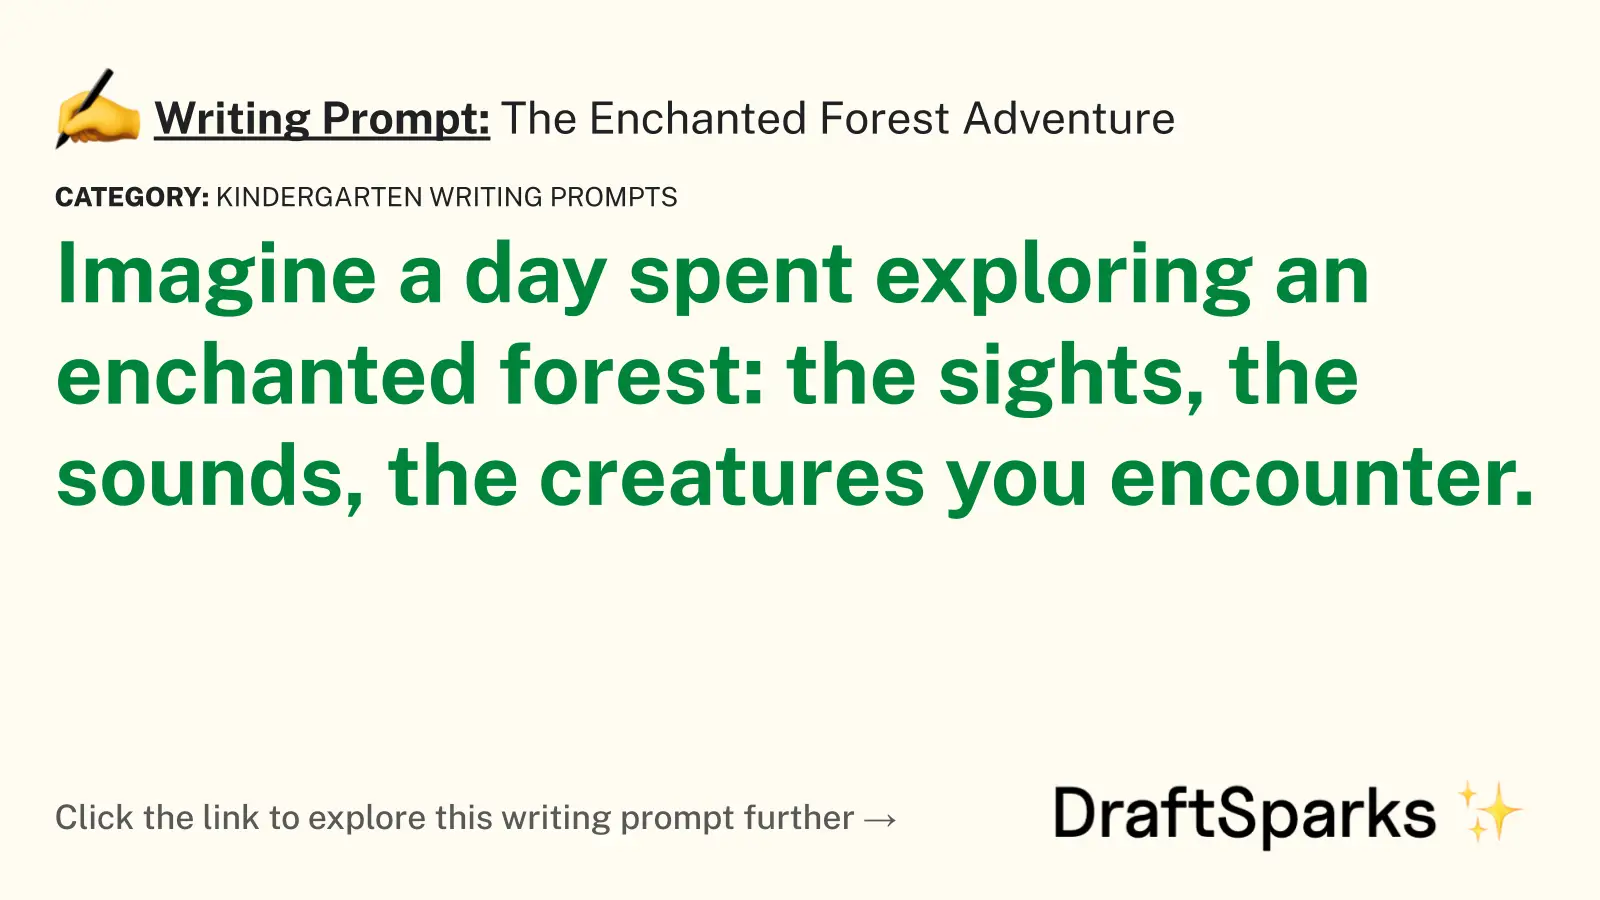 The Enchanted Forest Adventure